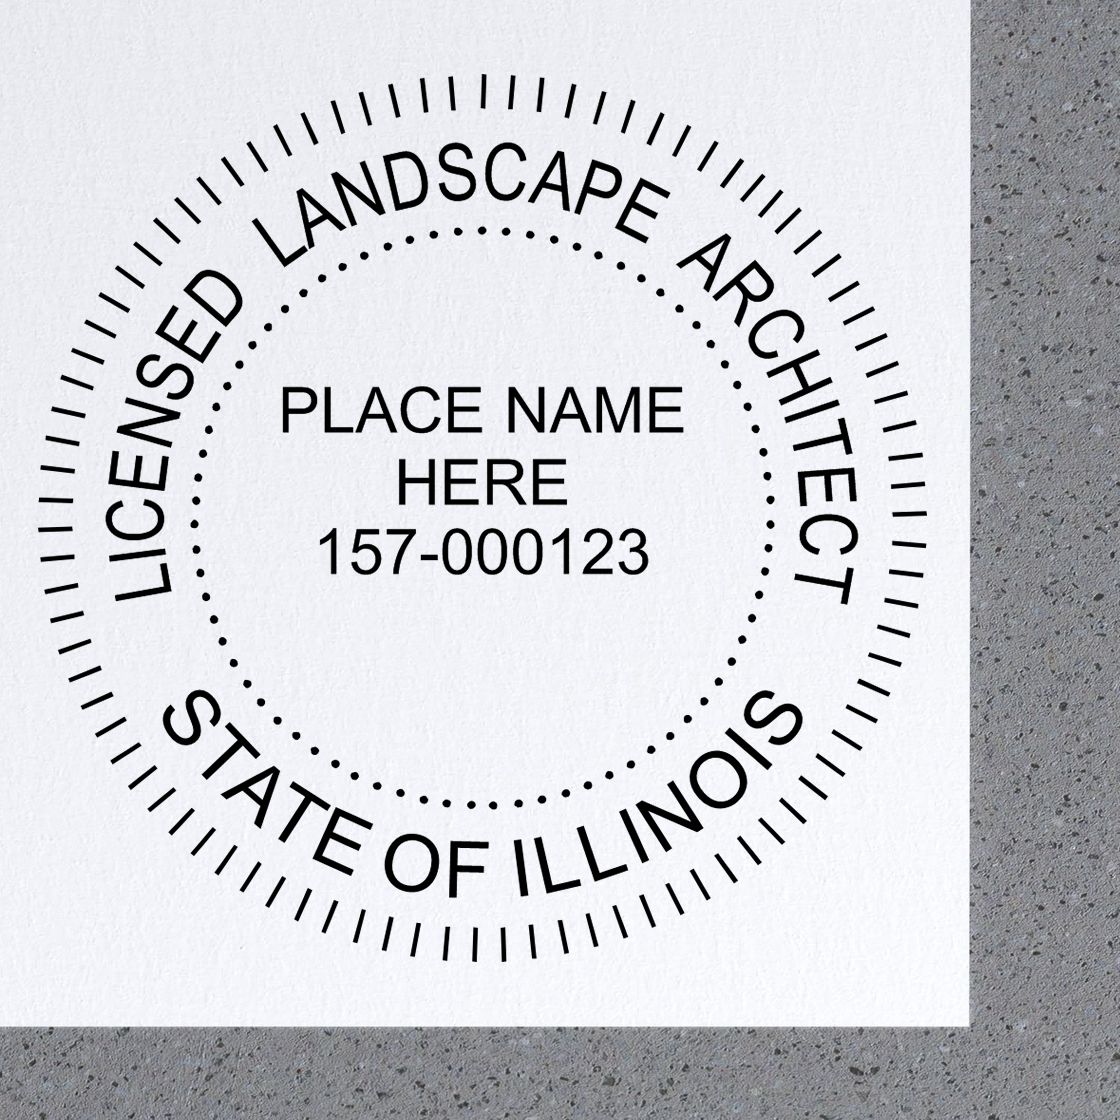 This paper is stamped with a sample imprint of the Slim Pre-Inked Illinois Landscape Architect Seal Stamp, signifying its quality and reliability.